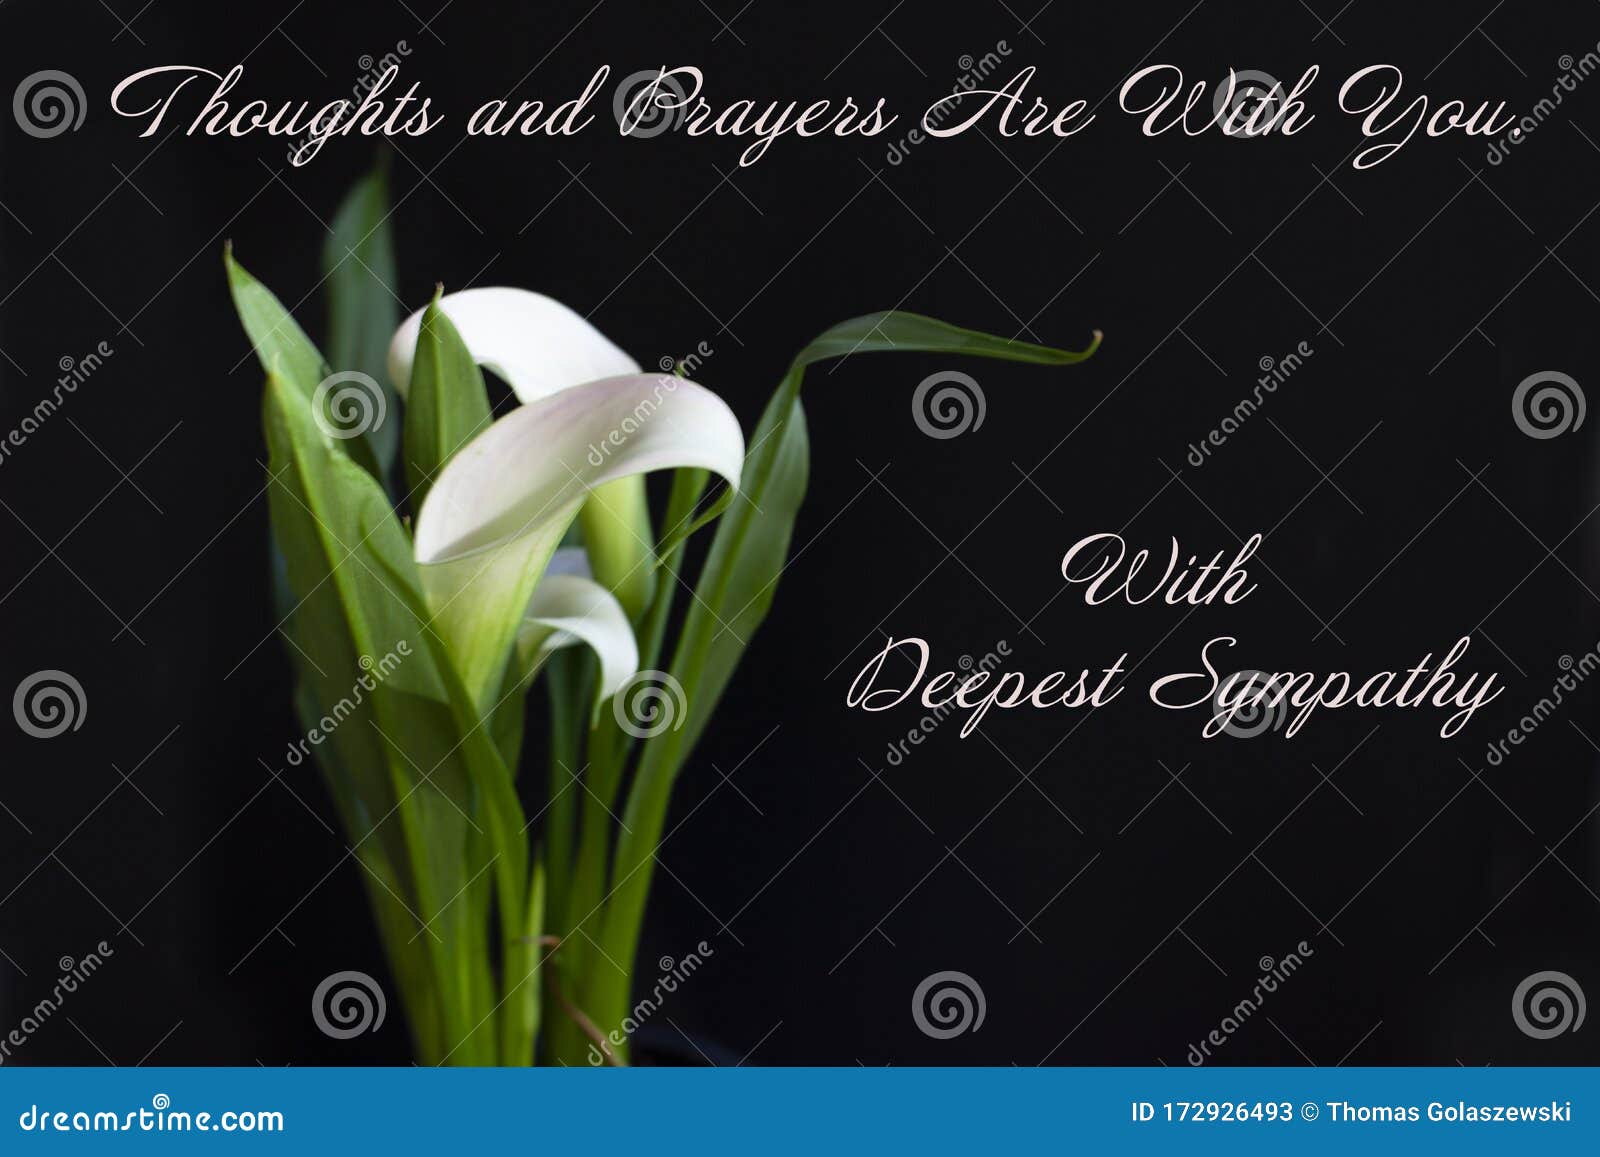 with deepest sympathy card with a white calla lily on a black background